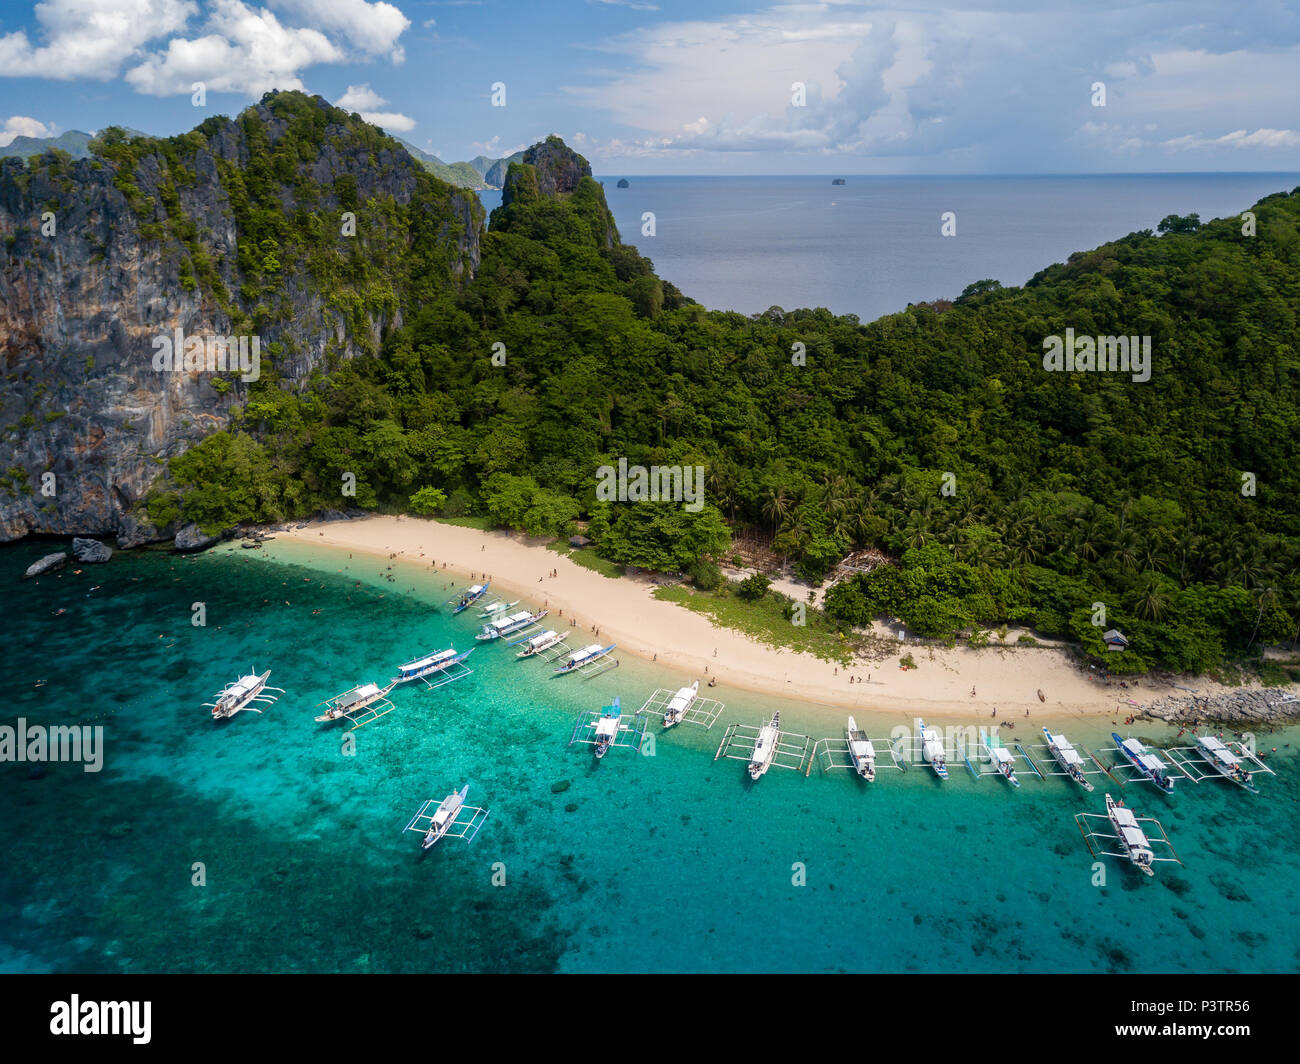 Aerial drone view of a beautiful tropical island and sandy beach surrounded by coral reef (Dilumacad Island) Stock Photo